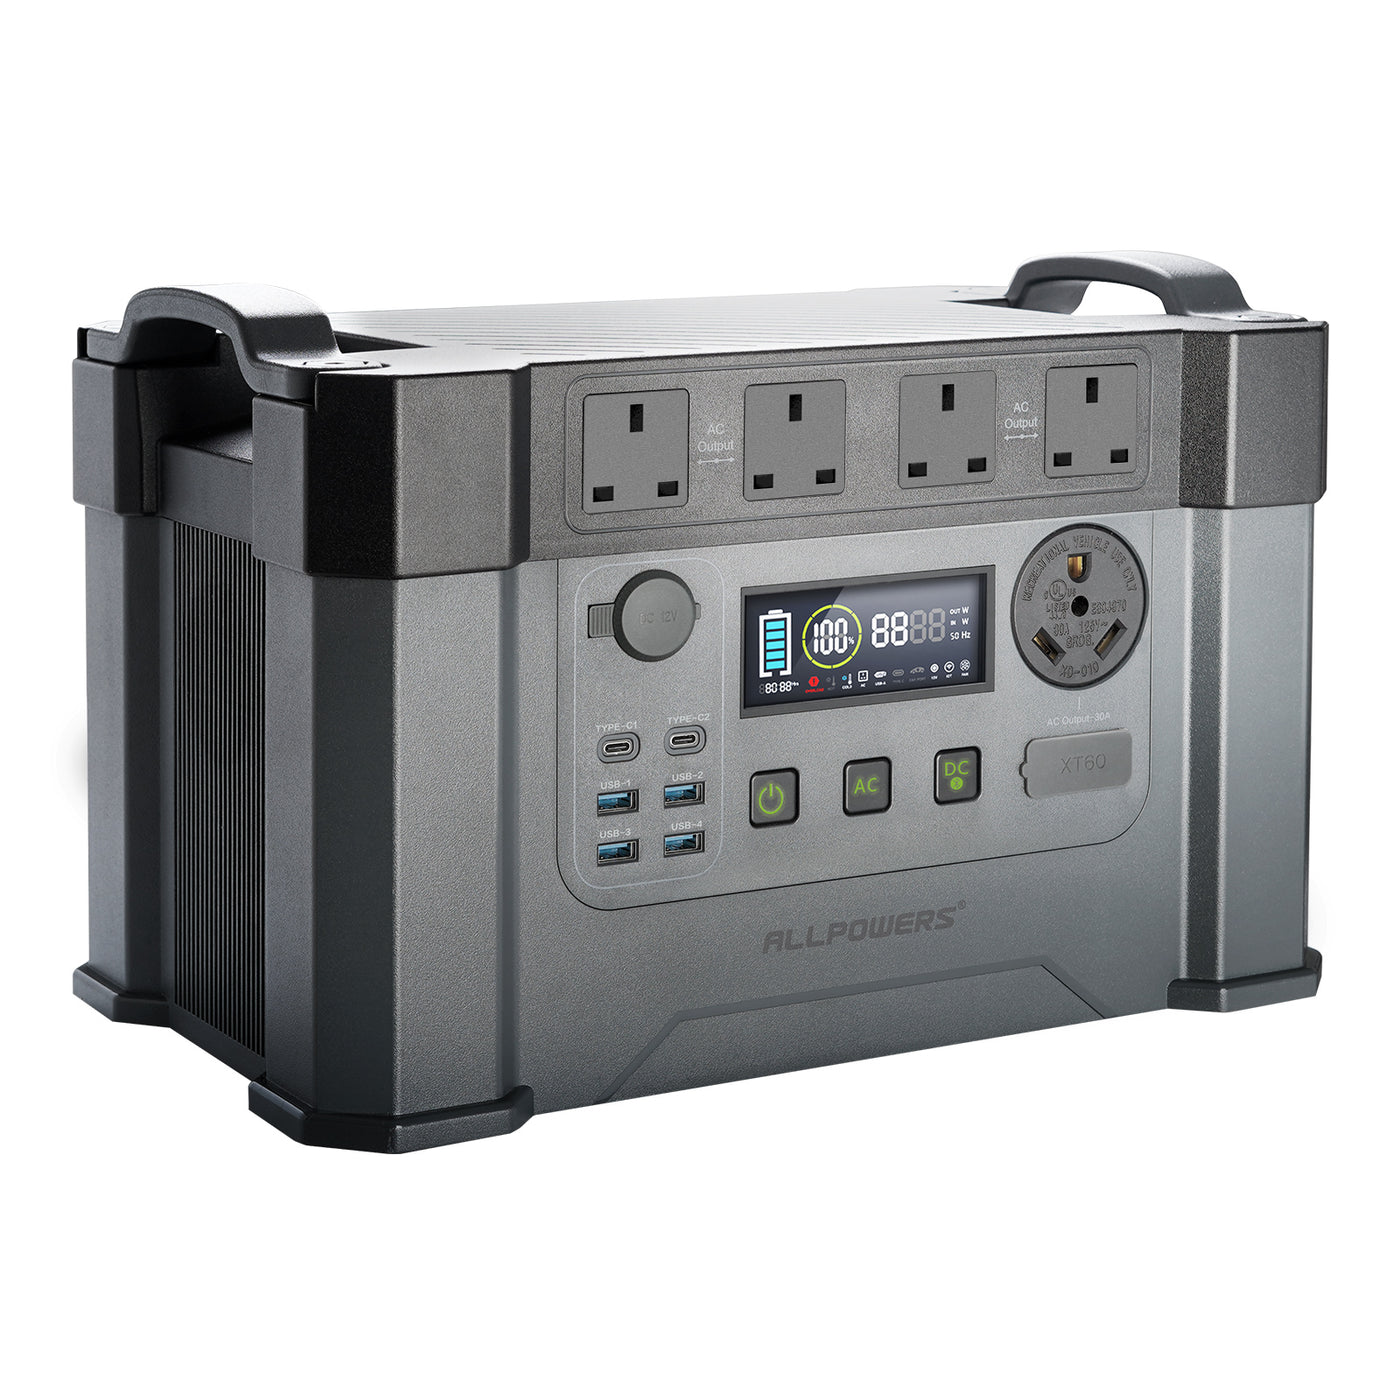 ALLPOWERS S2000 Pro Portable Power Station | 1500Wh 2400W